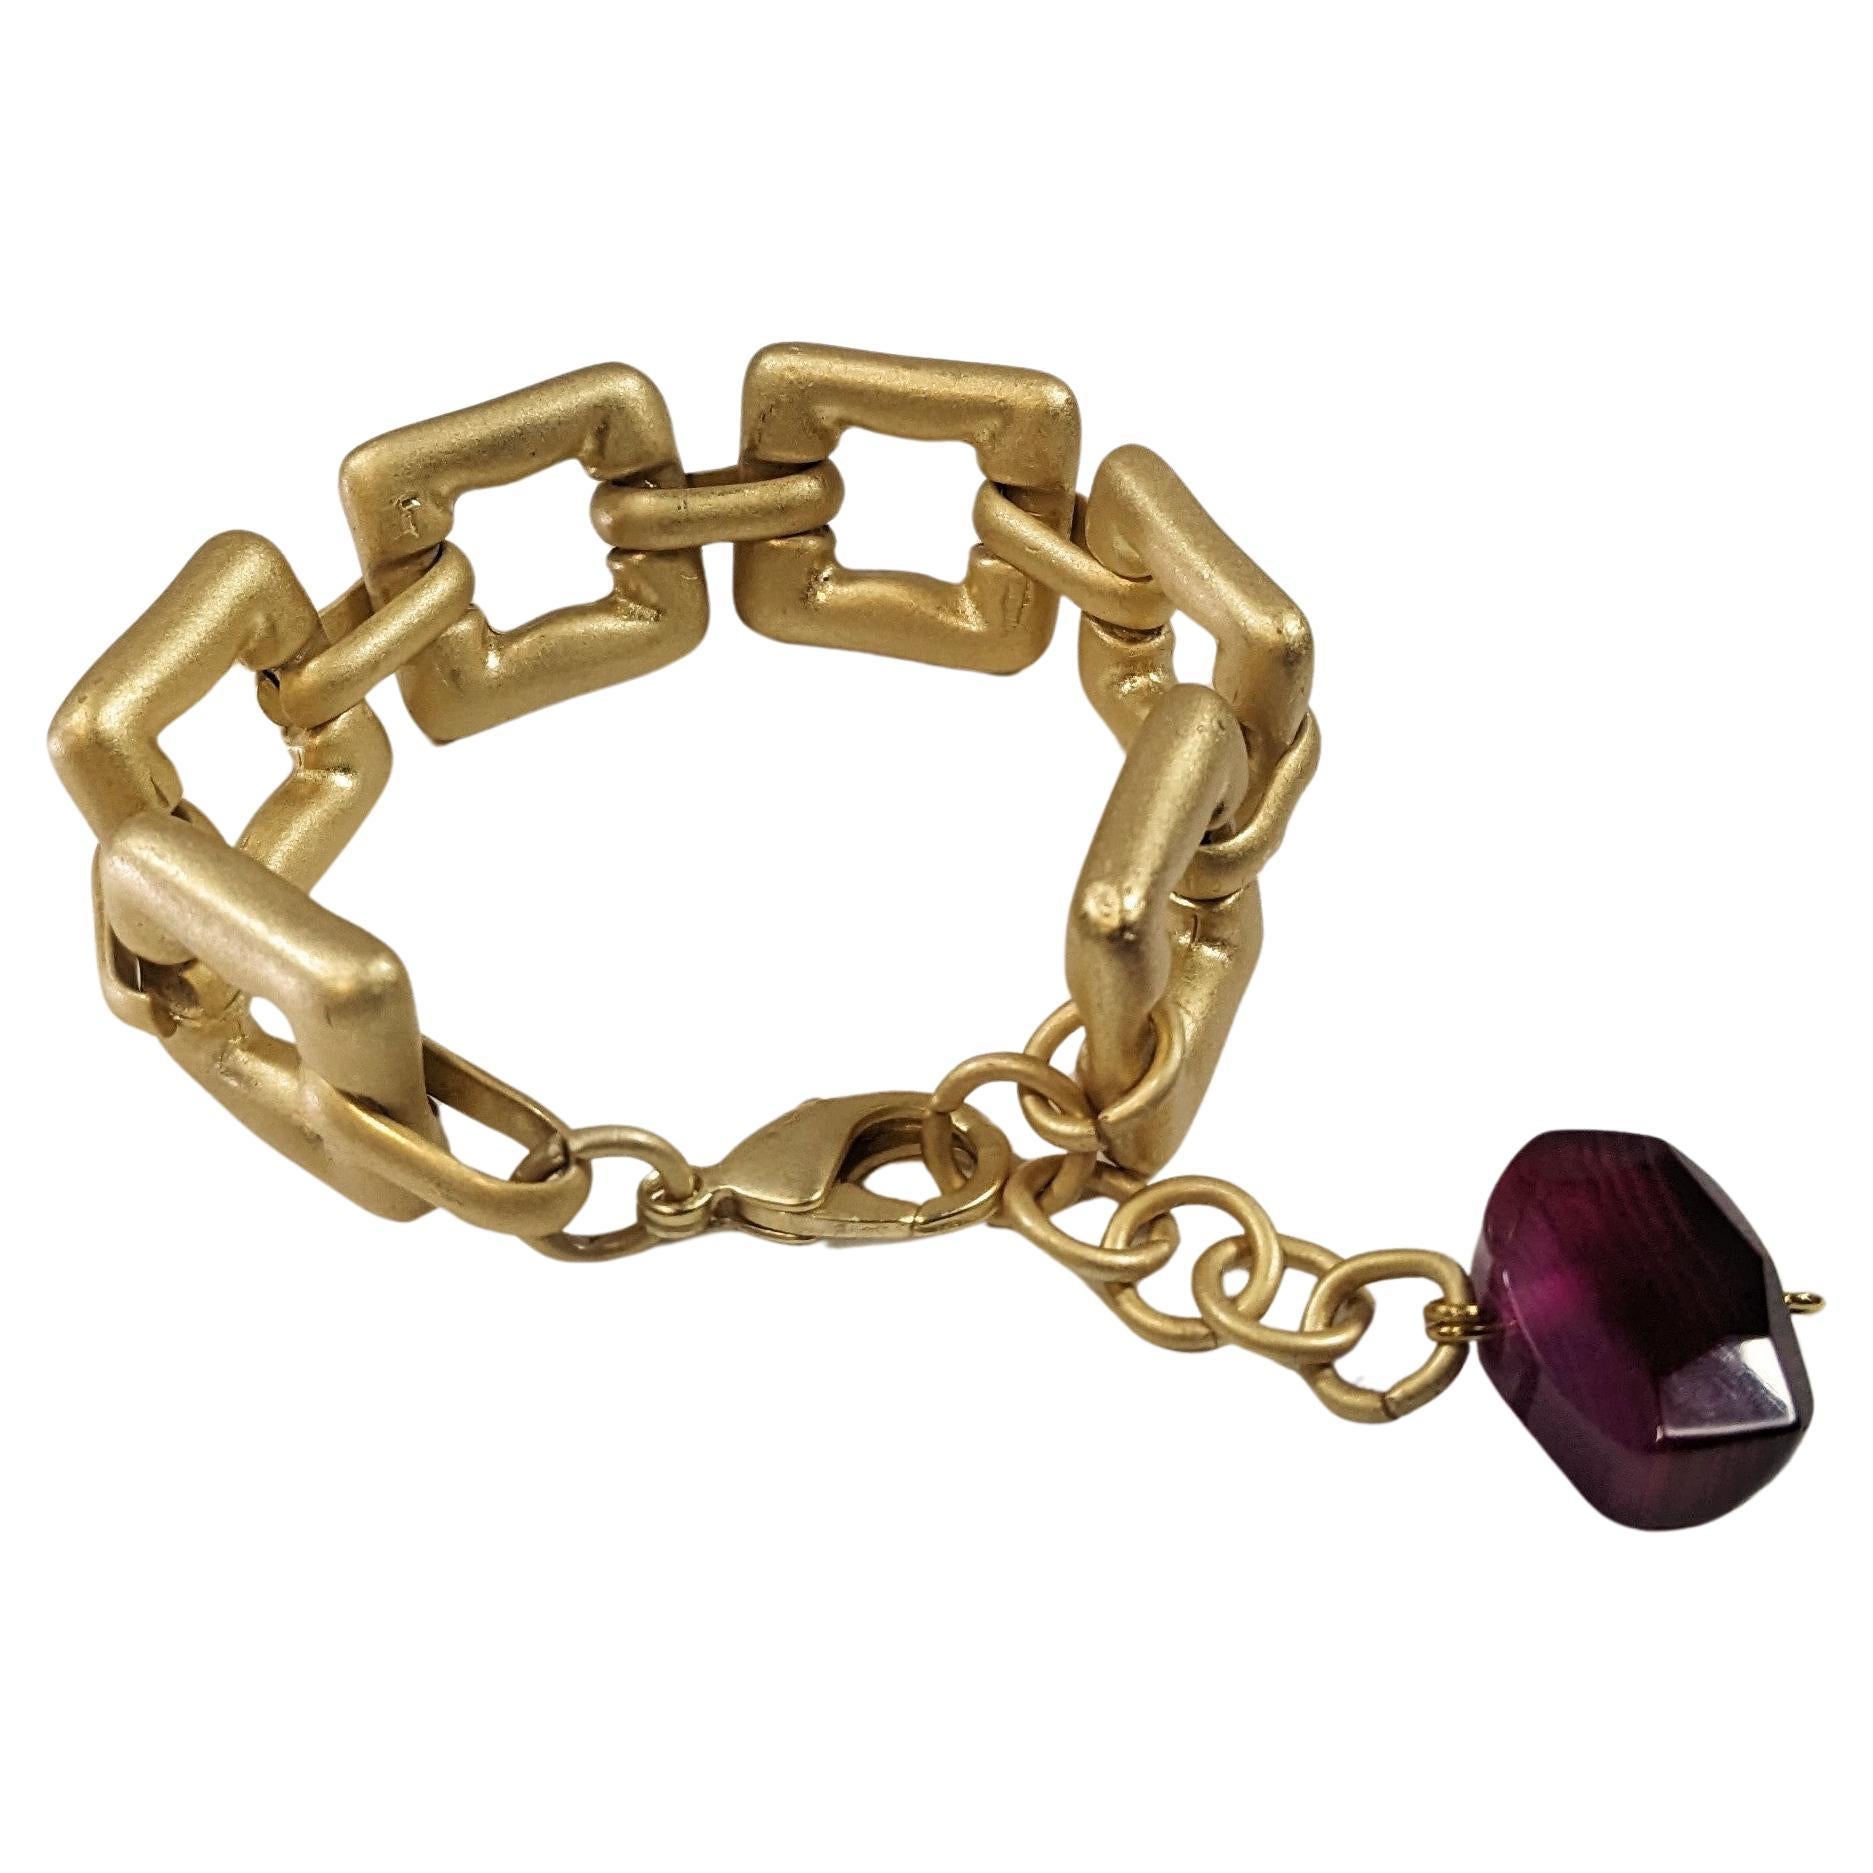  Square Chain Bracelet with Agates and Lobster Clasp